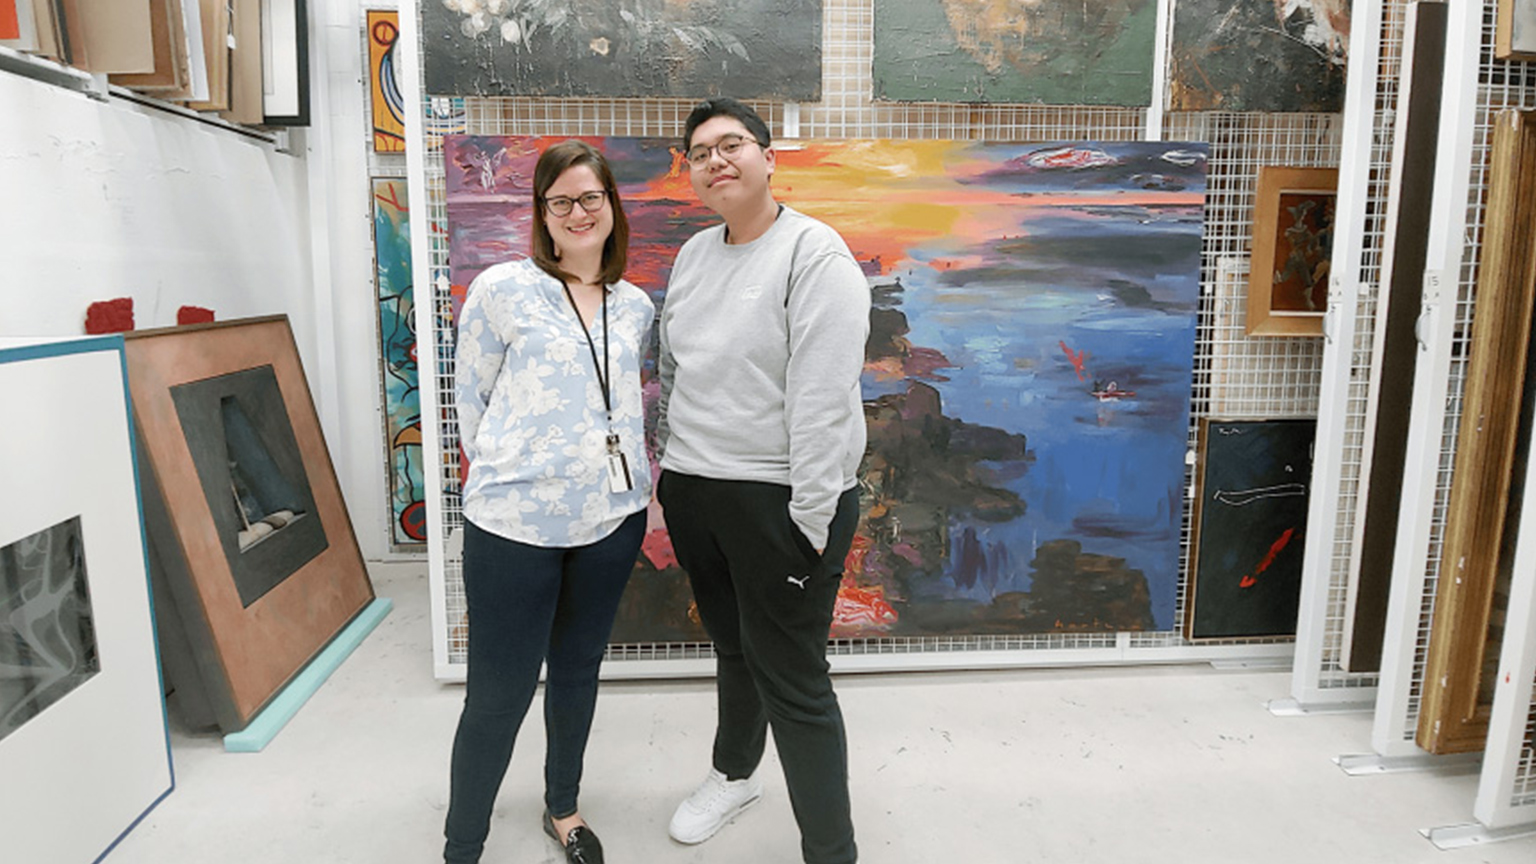 two people pose in room filled with art work